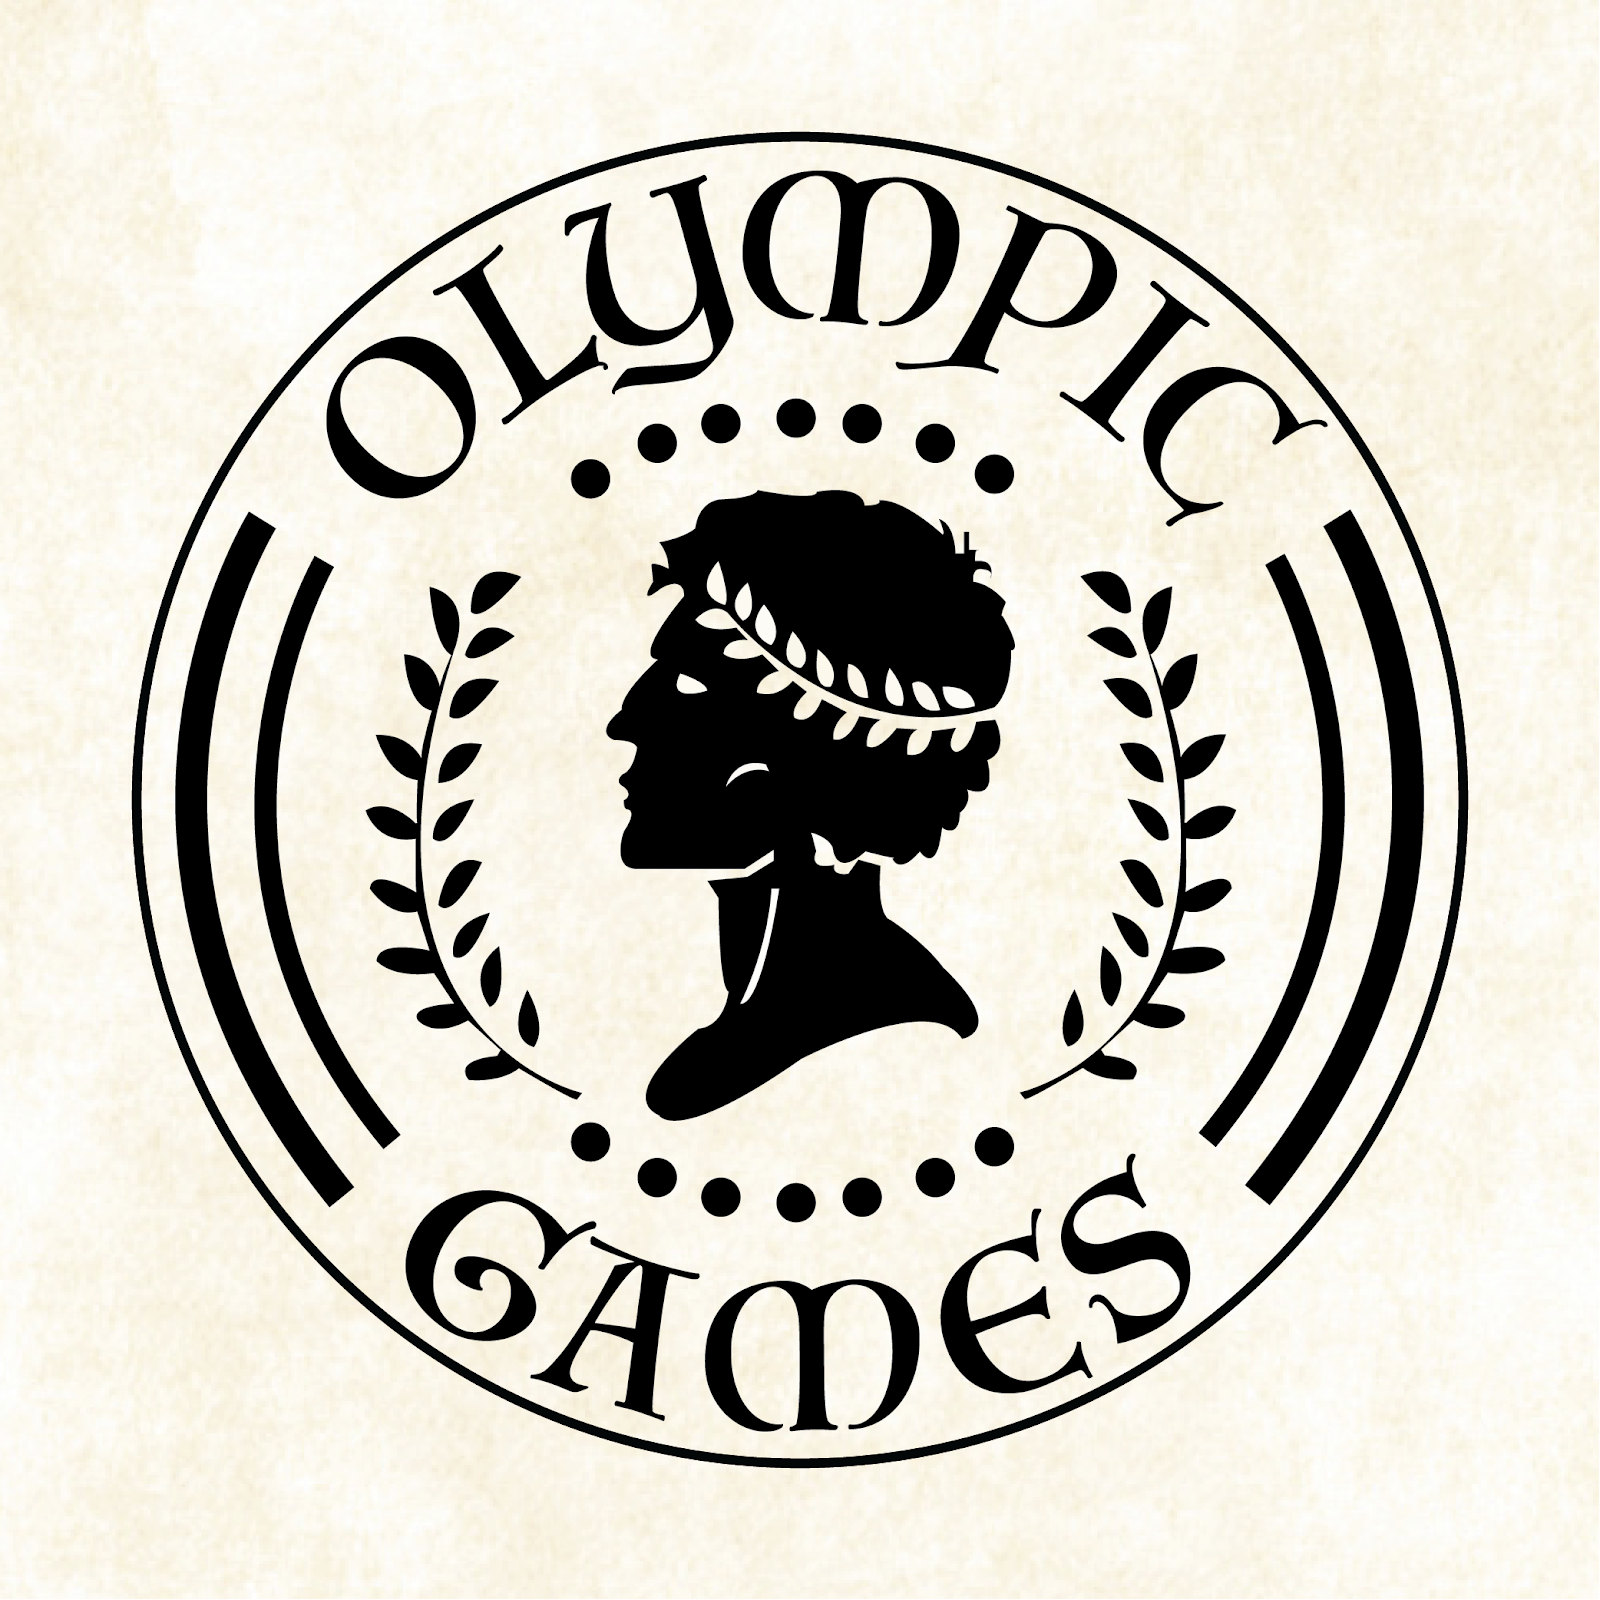 The logo for the Olympic Games reading challenge. A spartan profile with the laurel crown in a circle.